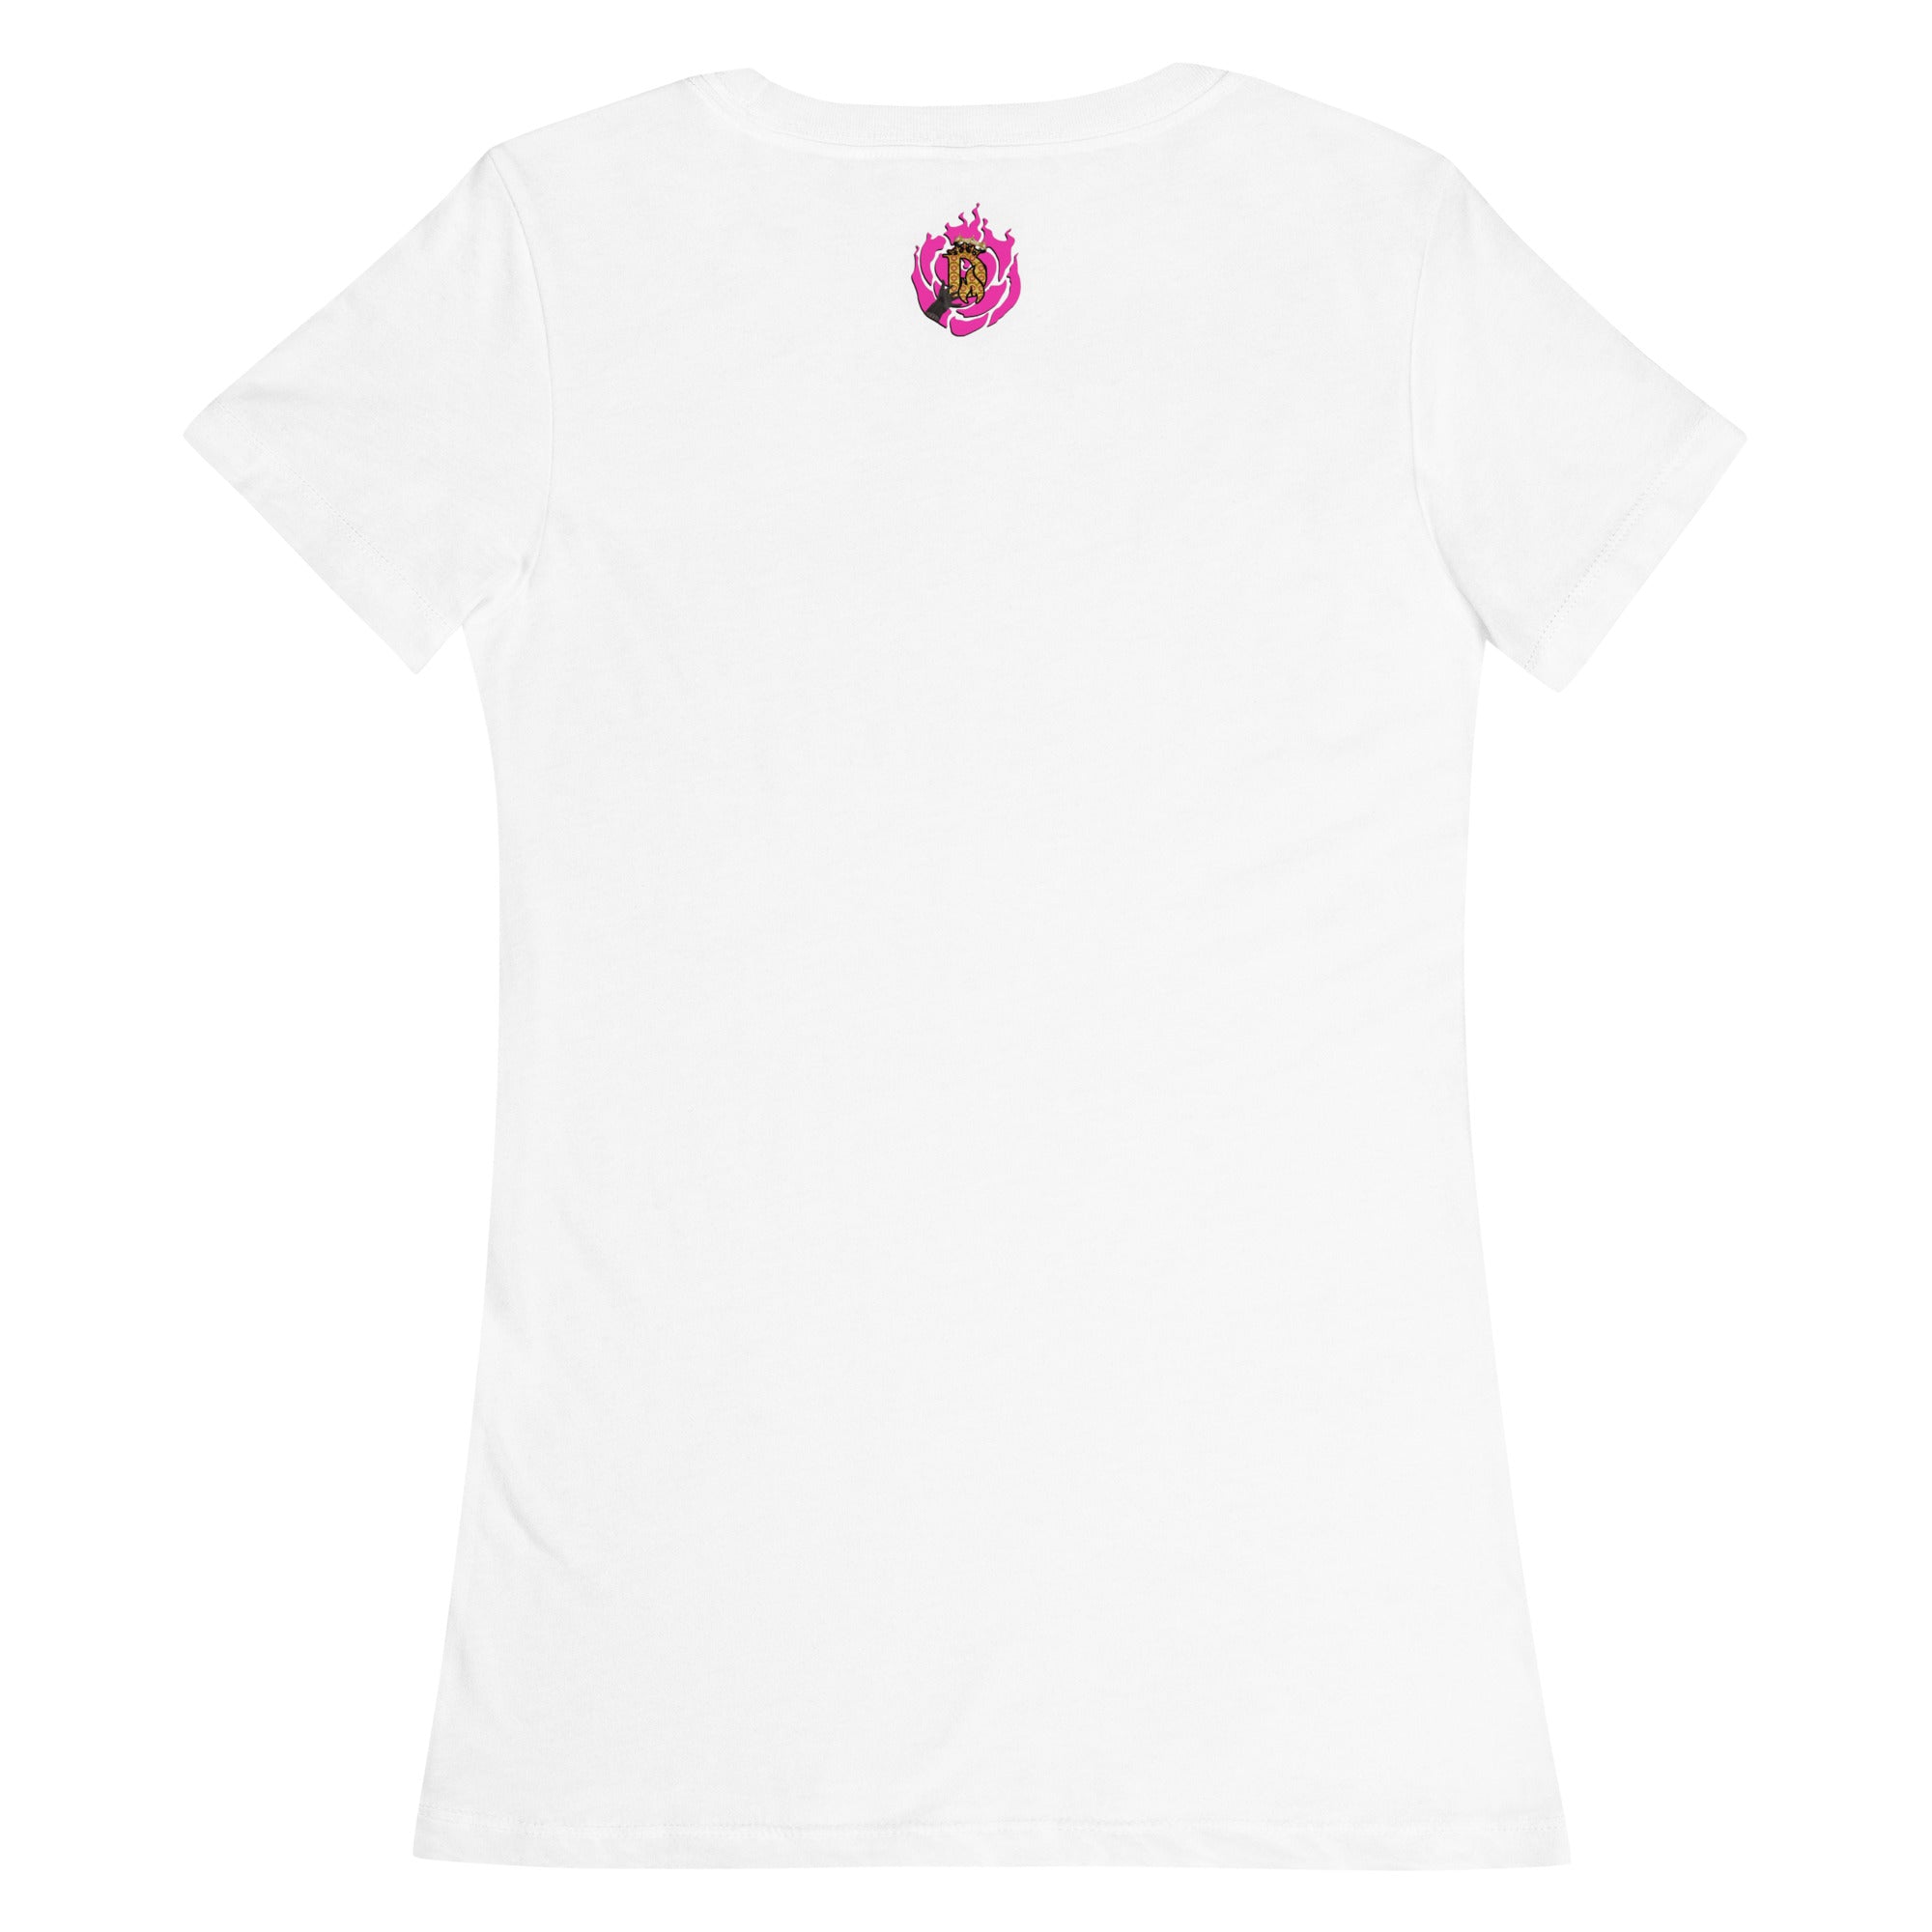 Women’s fitted Hustle Babe Pink Text Tee